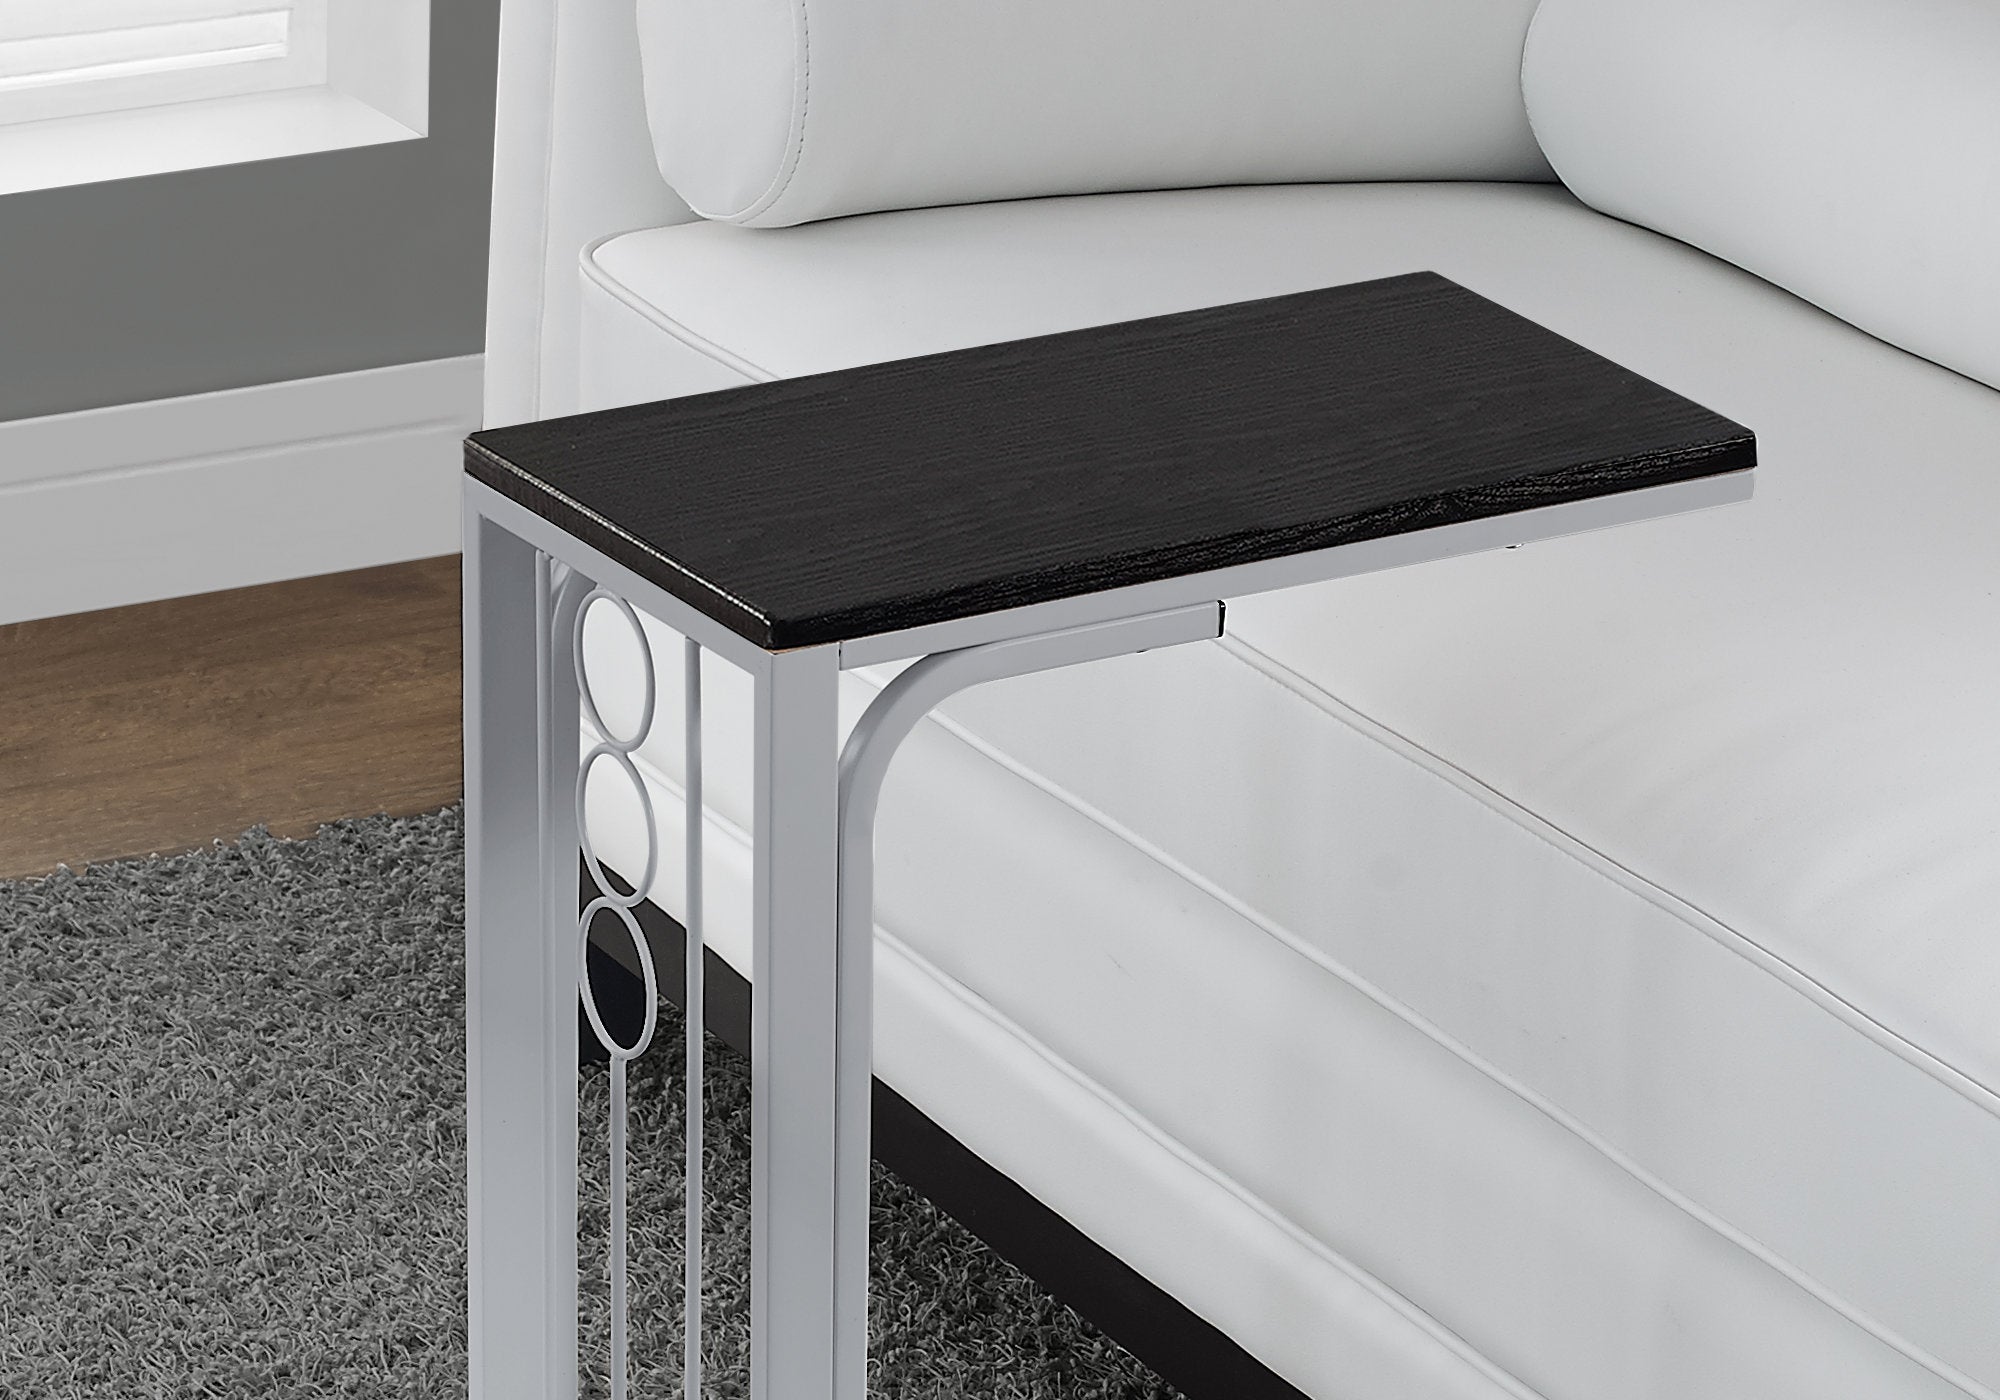 MN-423137    Accent Table, C-Shaped, End, Side, Snack, Living Room, Bedroom, Metal Legs, Laminate, Black, Silver, Contemporary, Modern